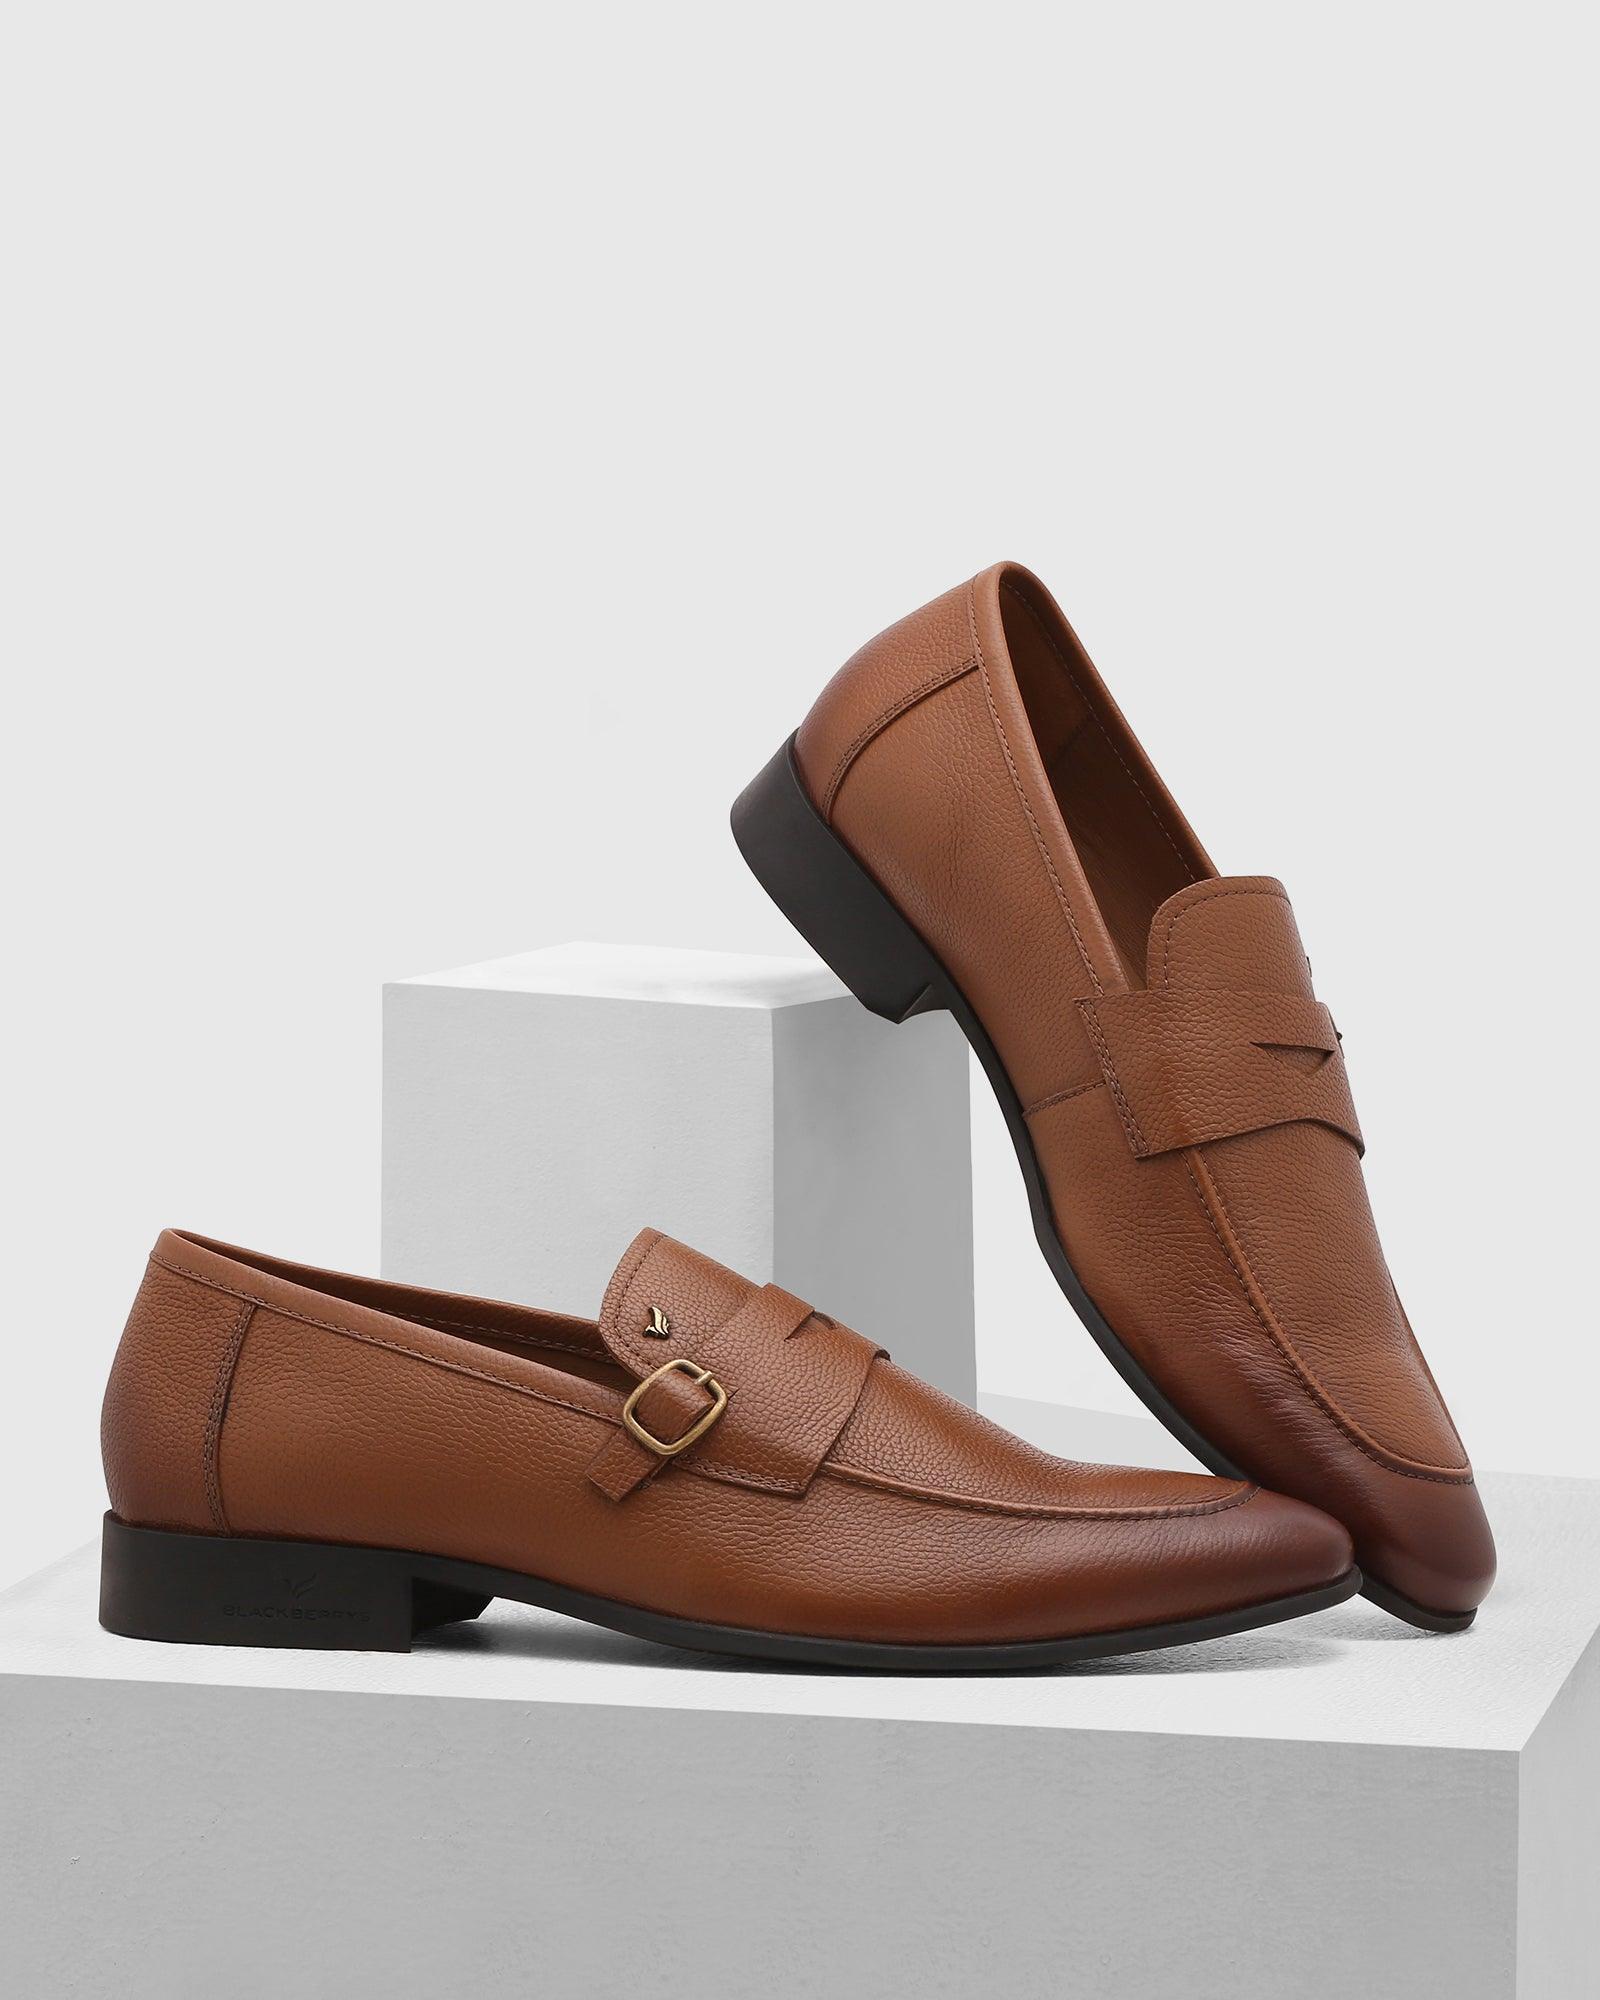 textured-leather-slip-on-shoes-in-tan-(qatar)